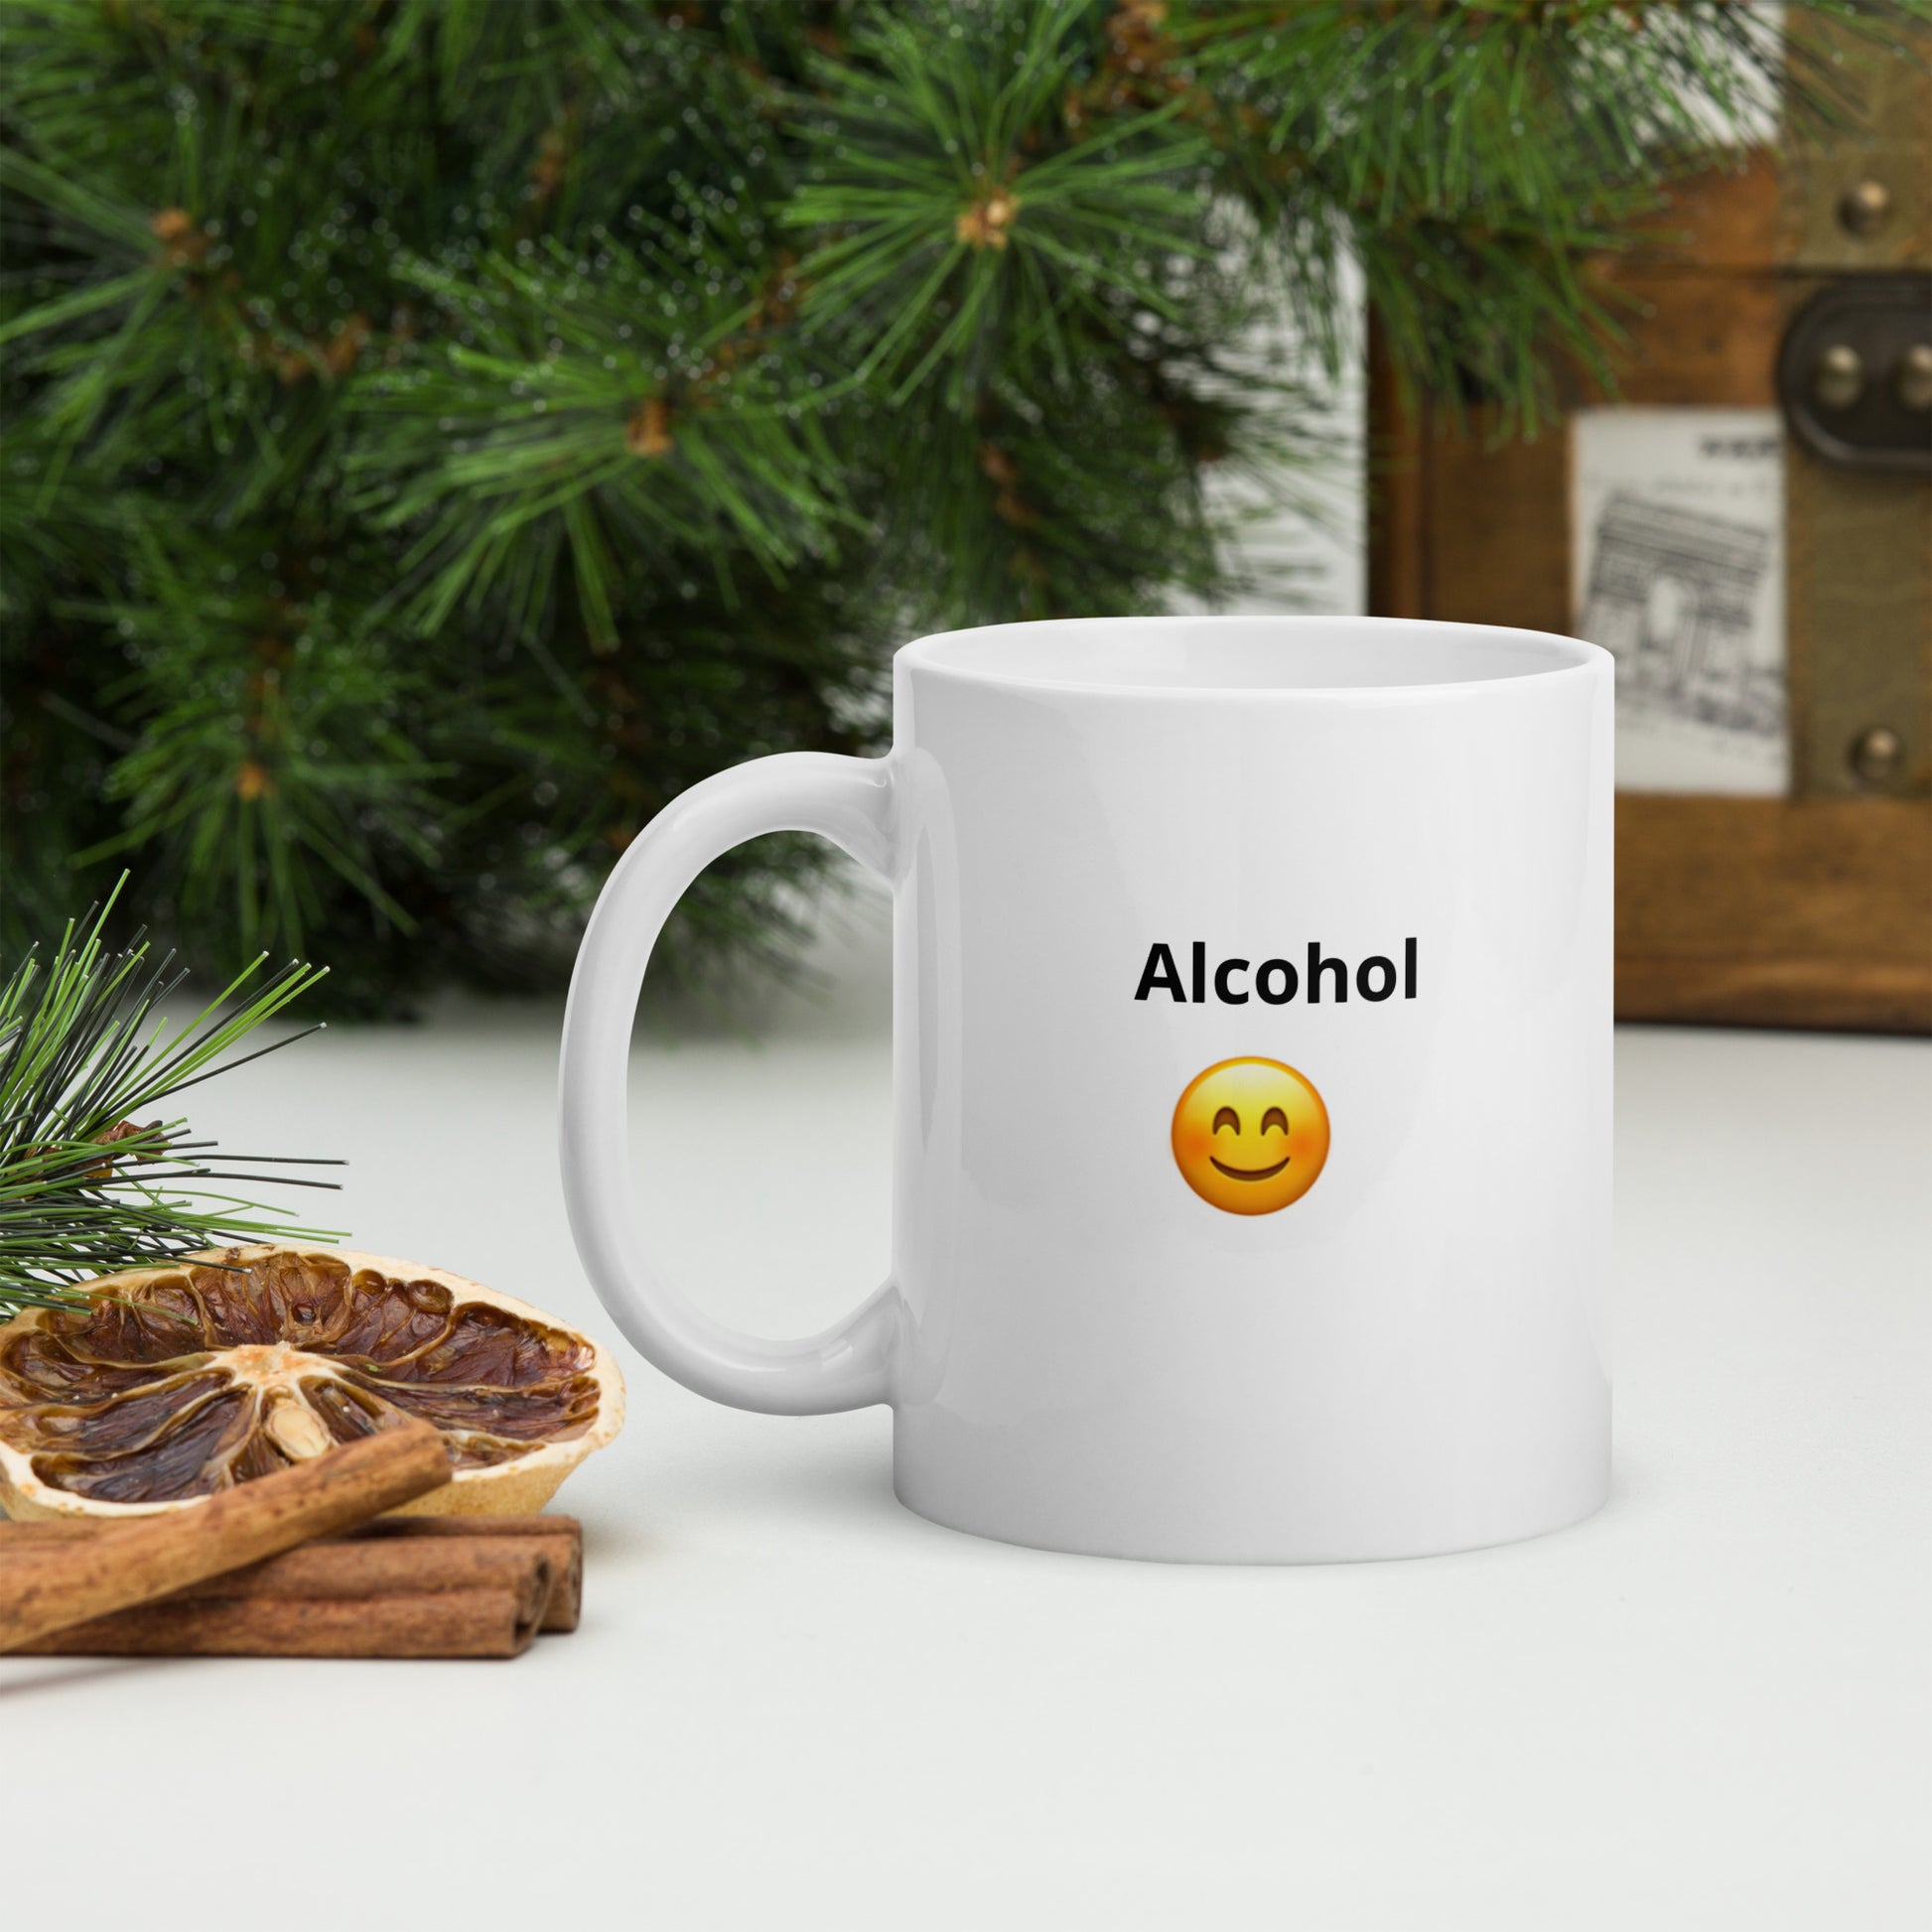 White ceramic mug with a happy face says  "Alcohol" on both sides